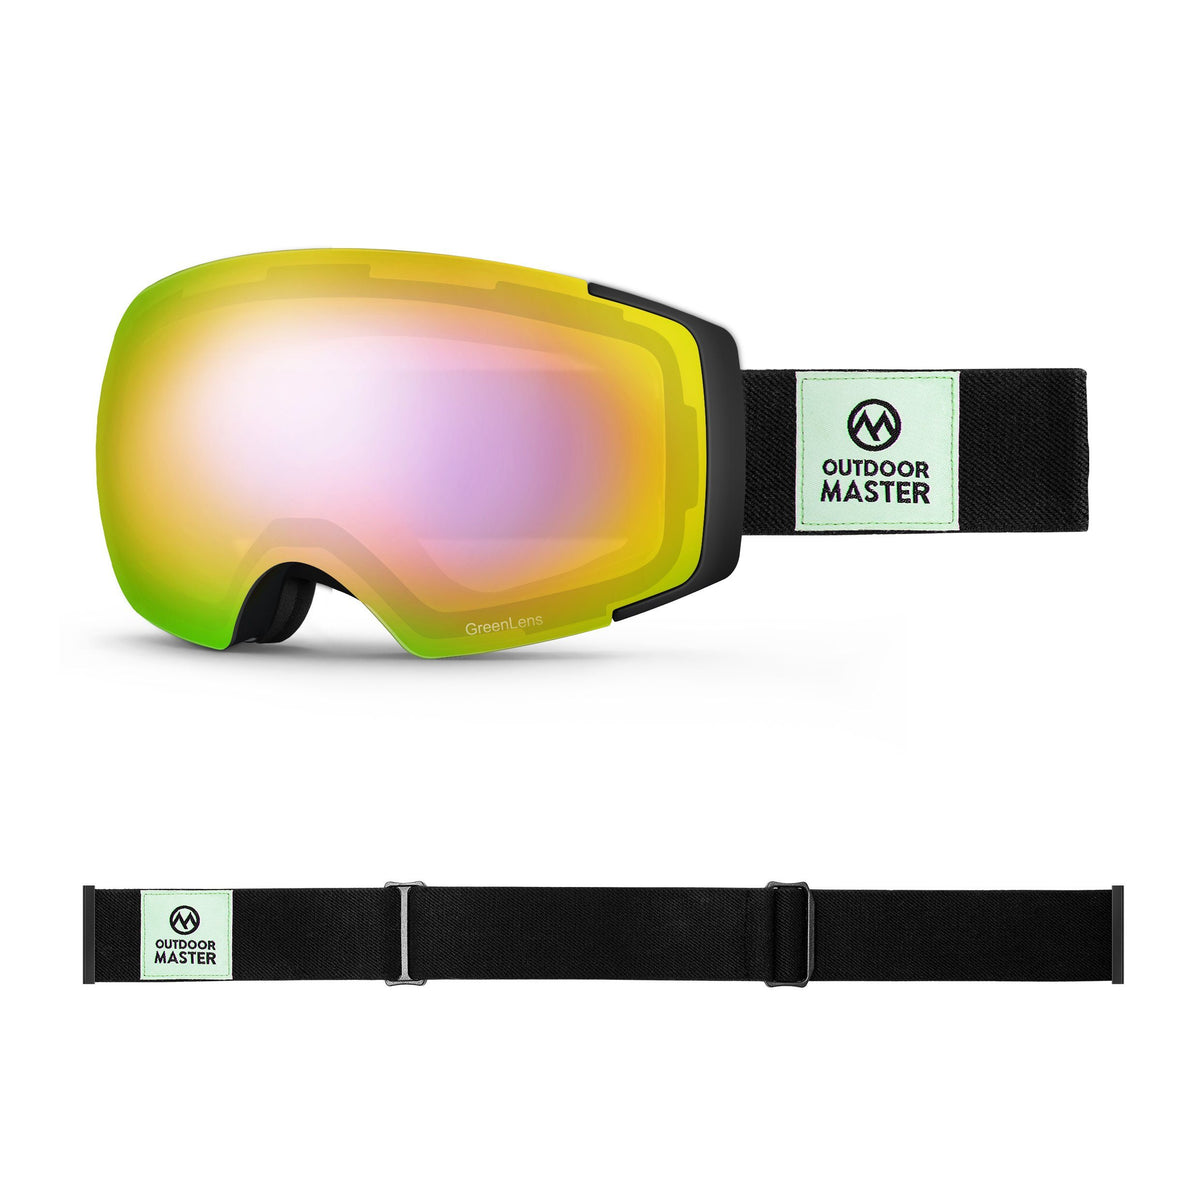 Eco-friendly Ski Goggles Pro Series - The Disappearing Places/Classic BambooStraps Limited Edition OutdoorMaster GreenLens VLT 45% TAC Purple with REVO Red Polarized Classic BambooStraps